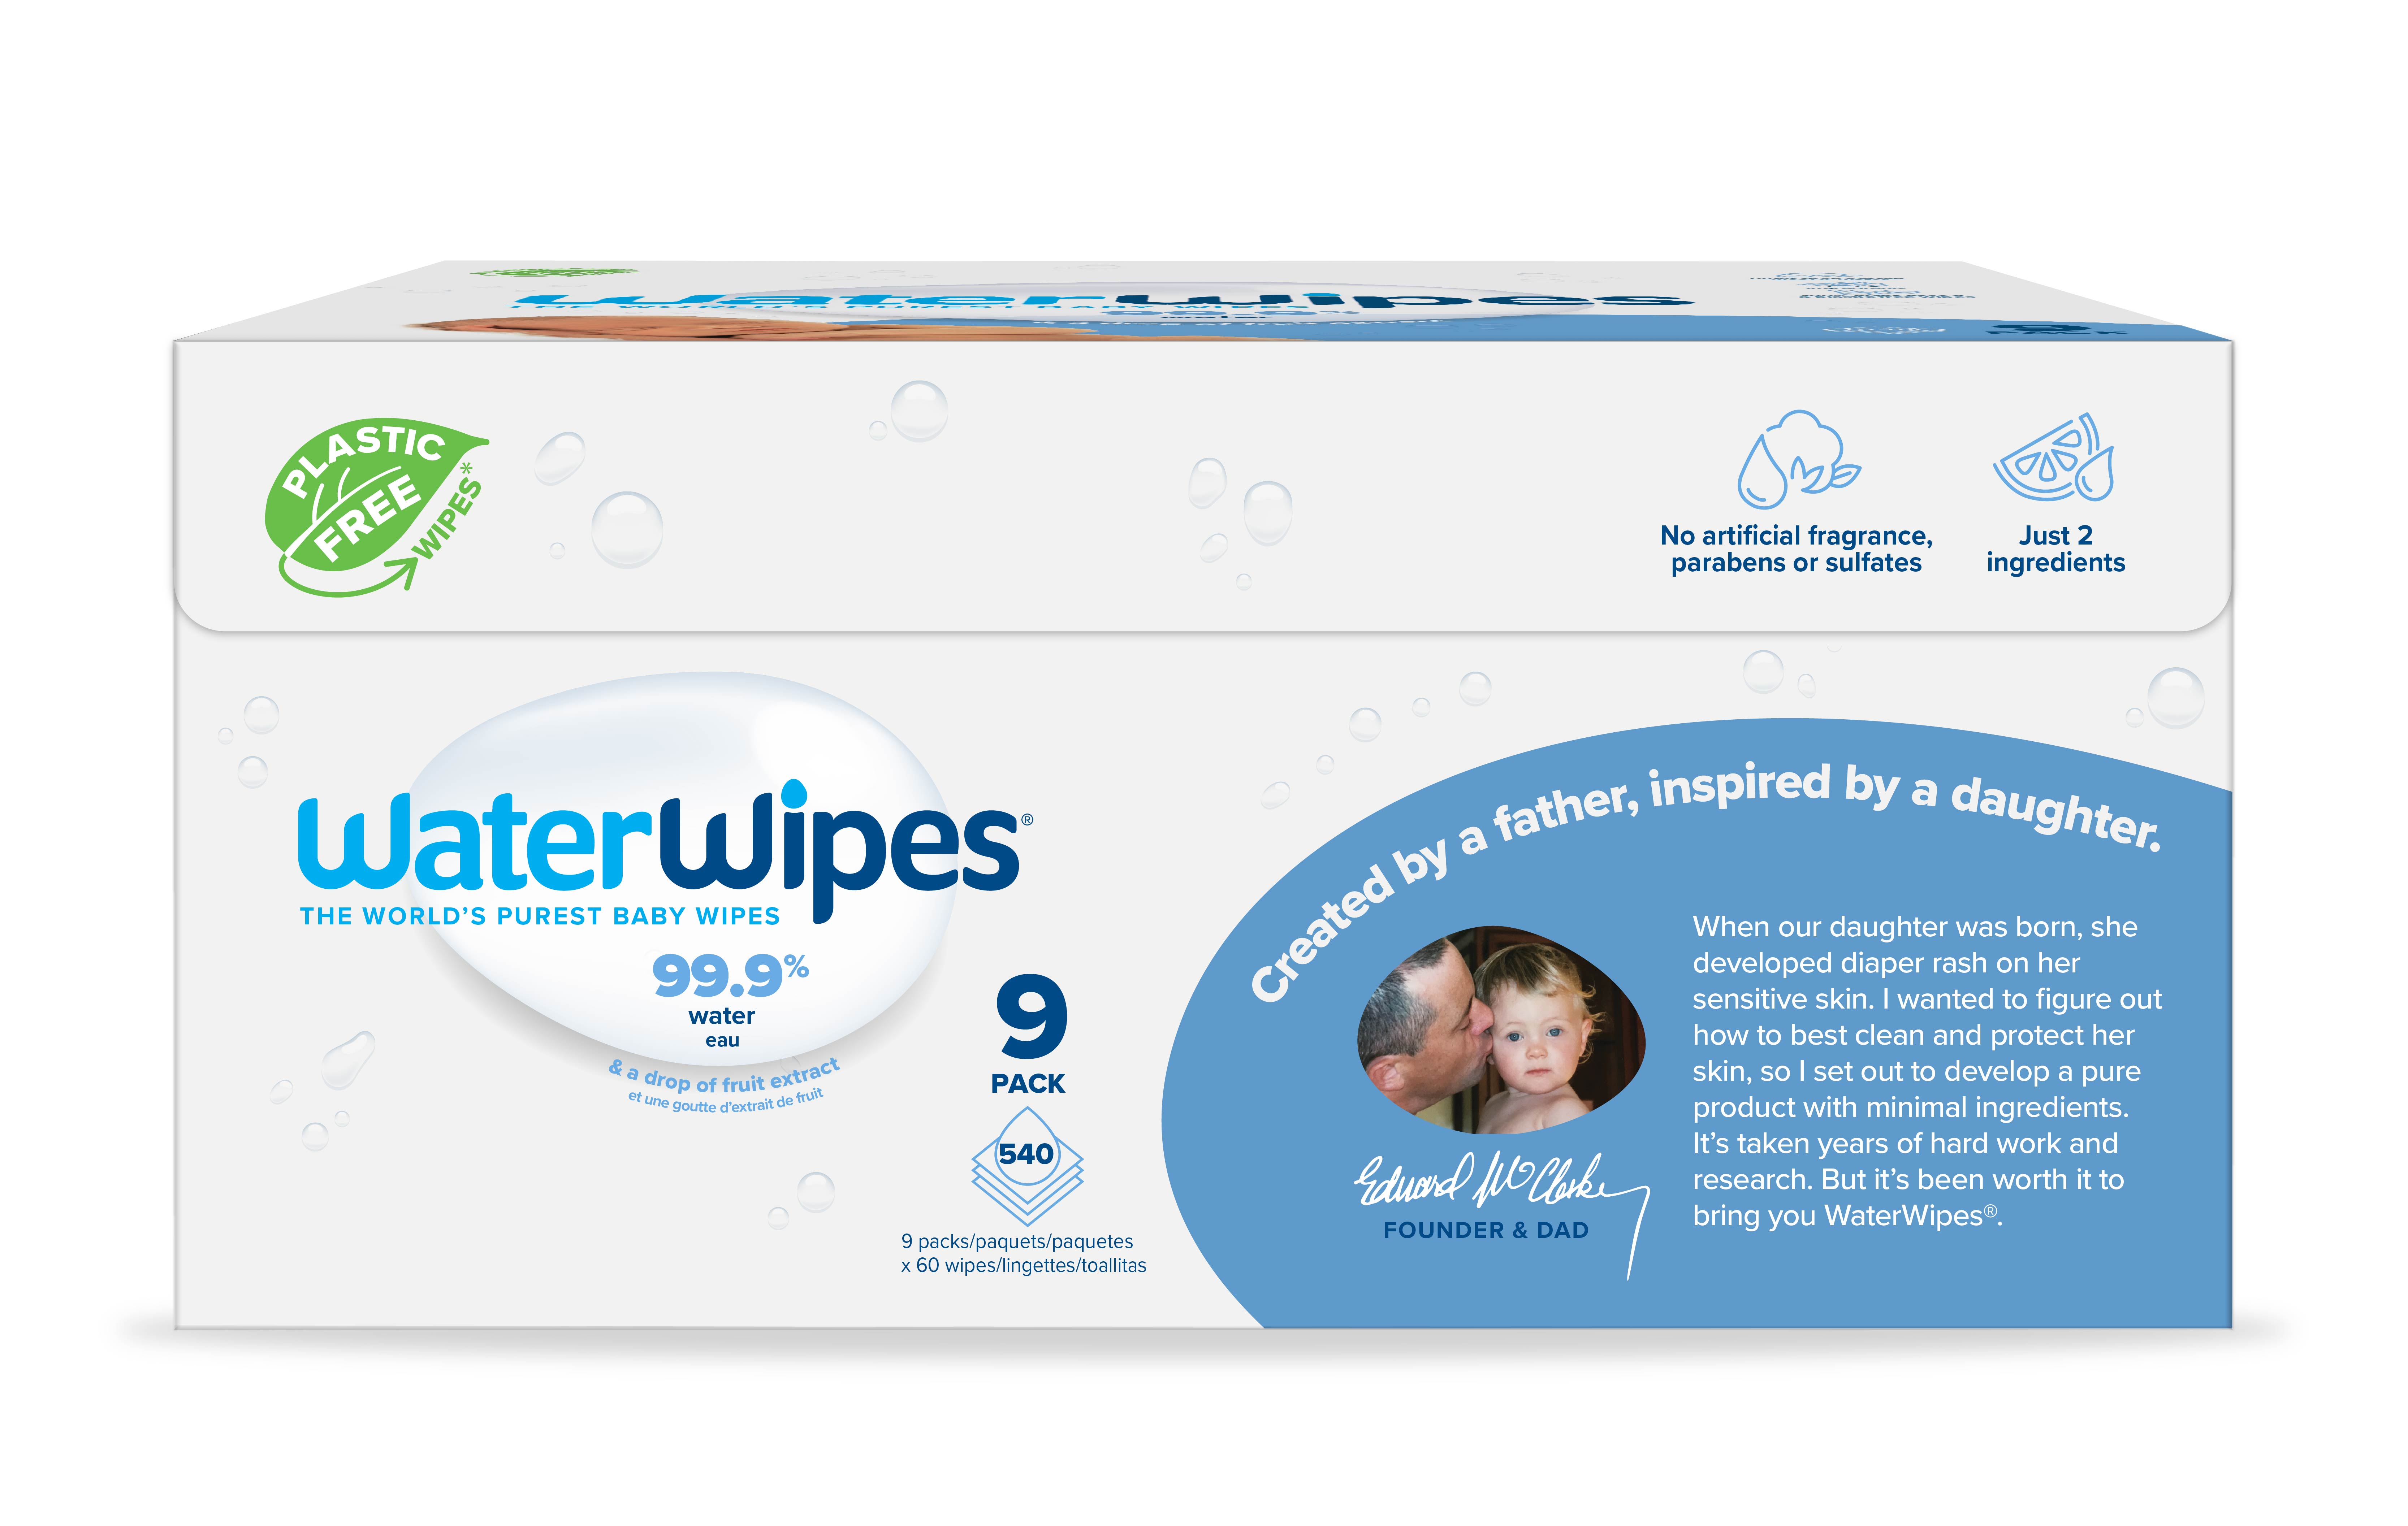 WaterWipes Plastic-Free Original 99.9% Water Based Baby Wipes, Fragrance-Free for Sensitive Skin, 540 Count (9 Packs) - image 3 of 10